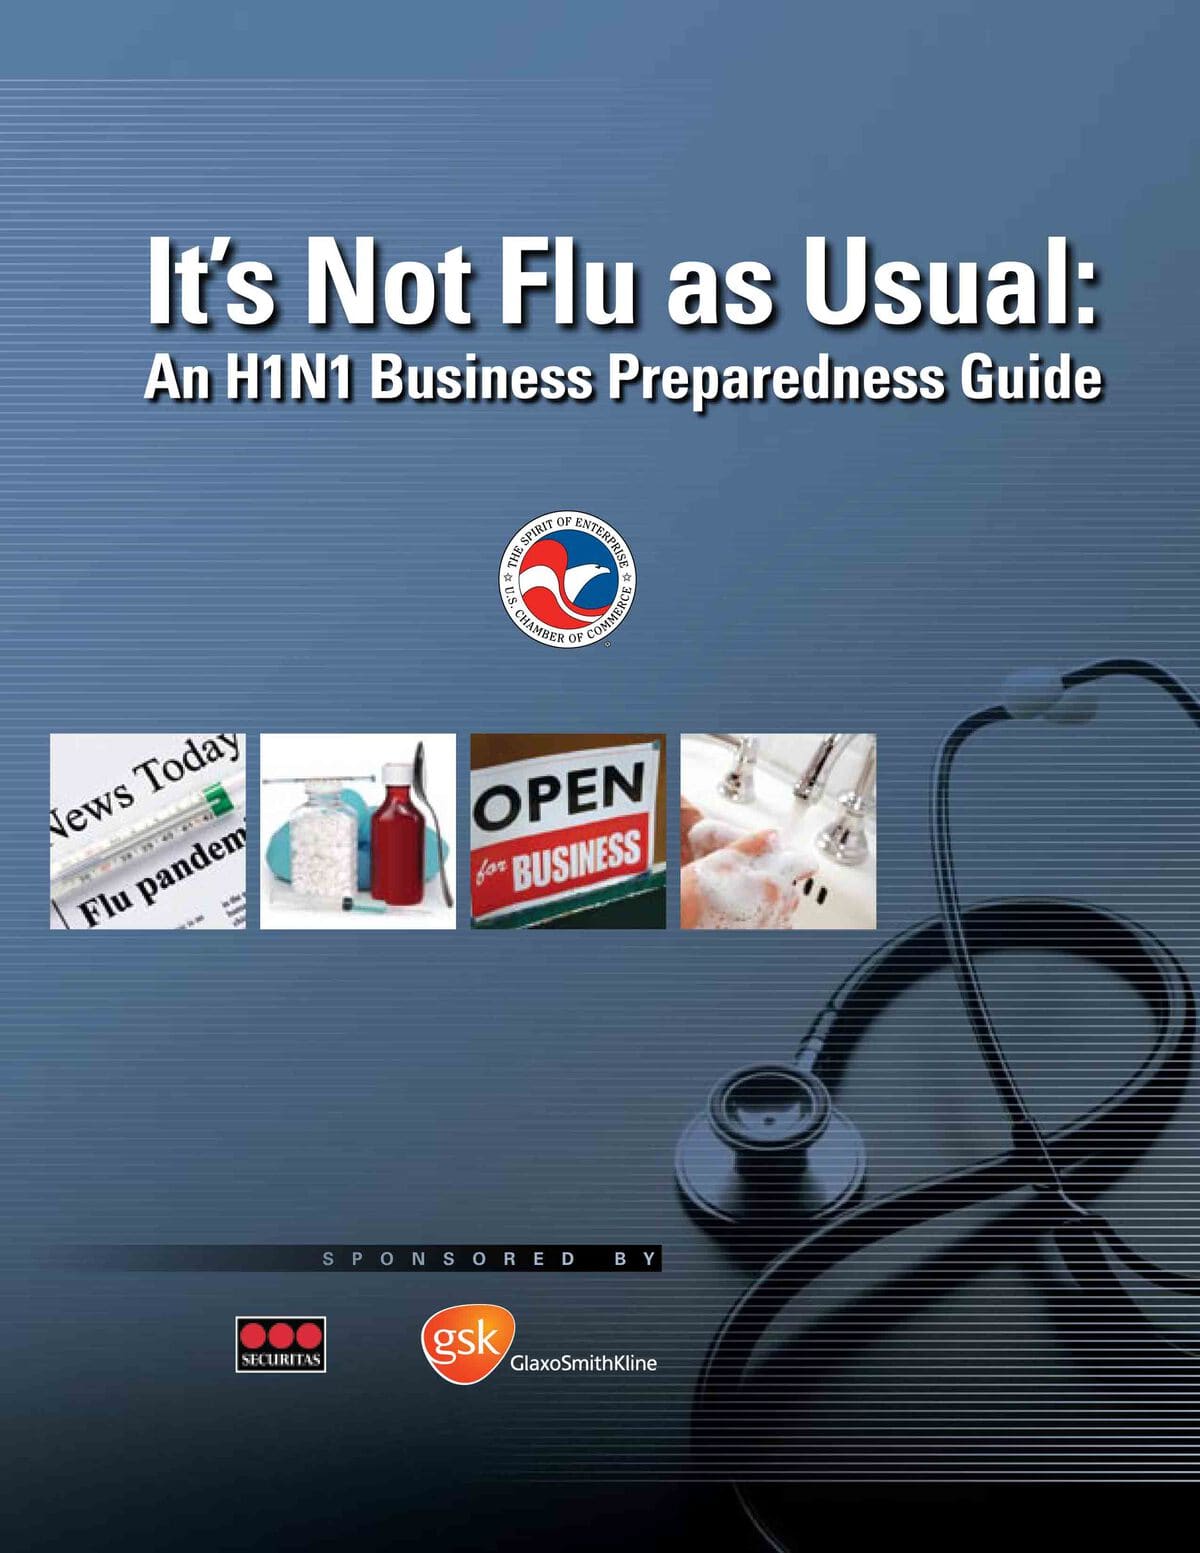 The U.s. Chamber Released &Quot;It's Not Flu As Usual,&Quot; Which Is An H1N1 Preparedness Guide Written For Businesses Of All Sizes.